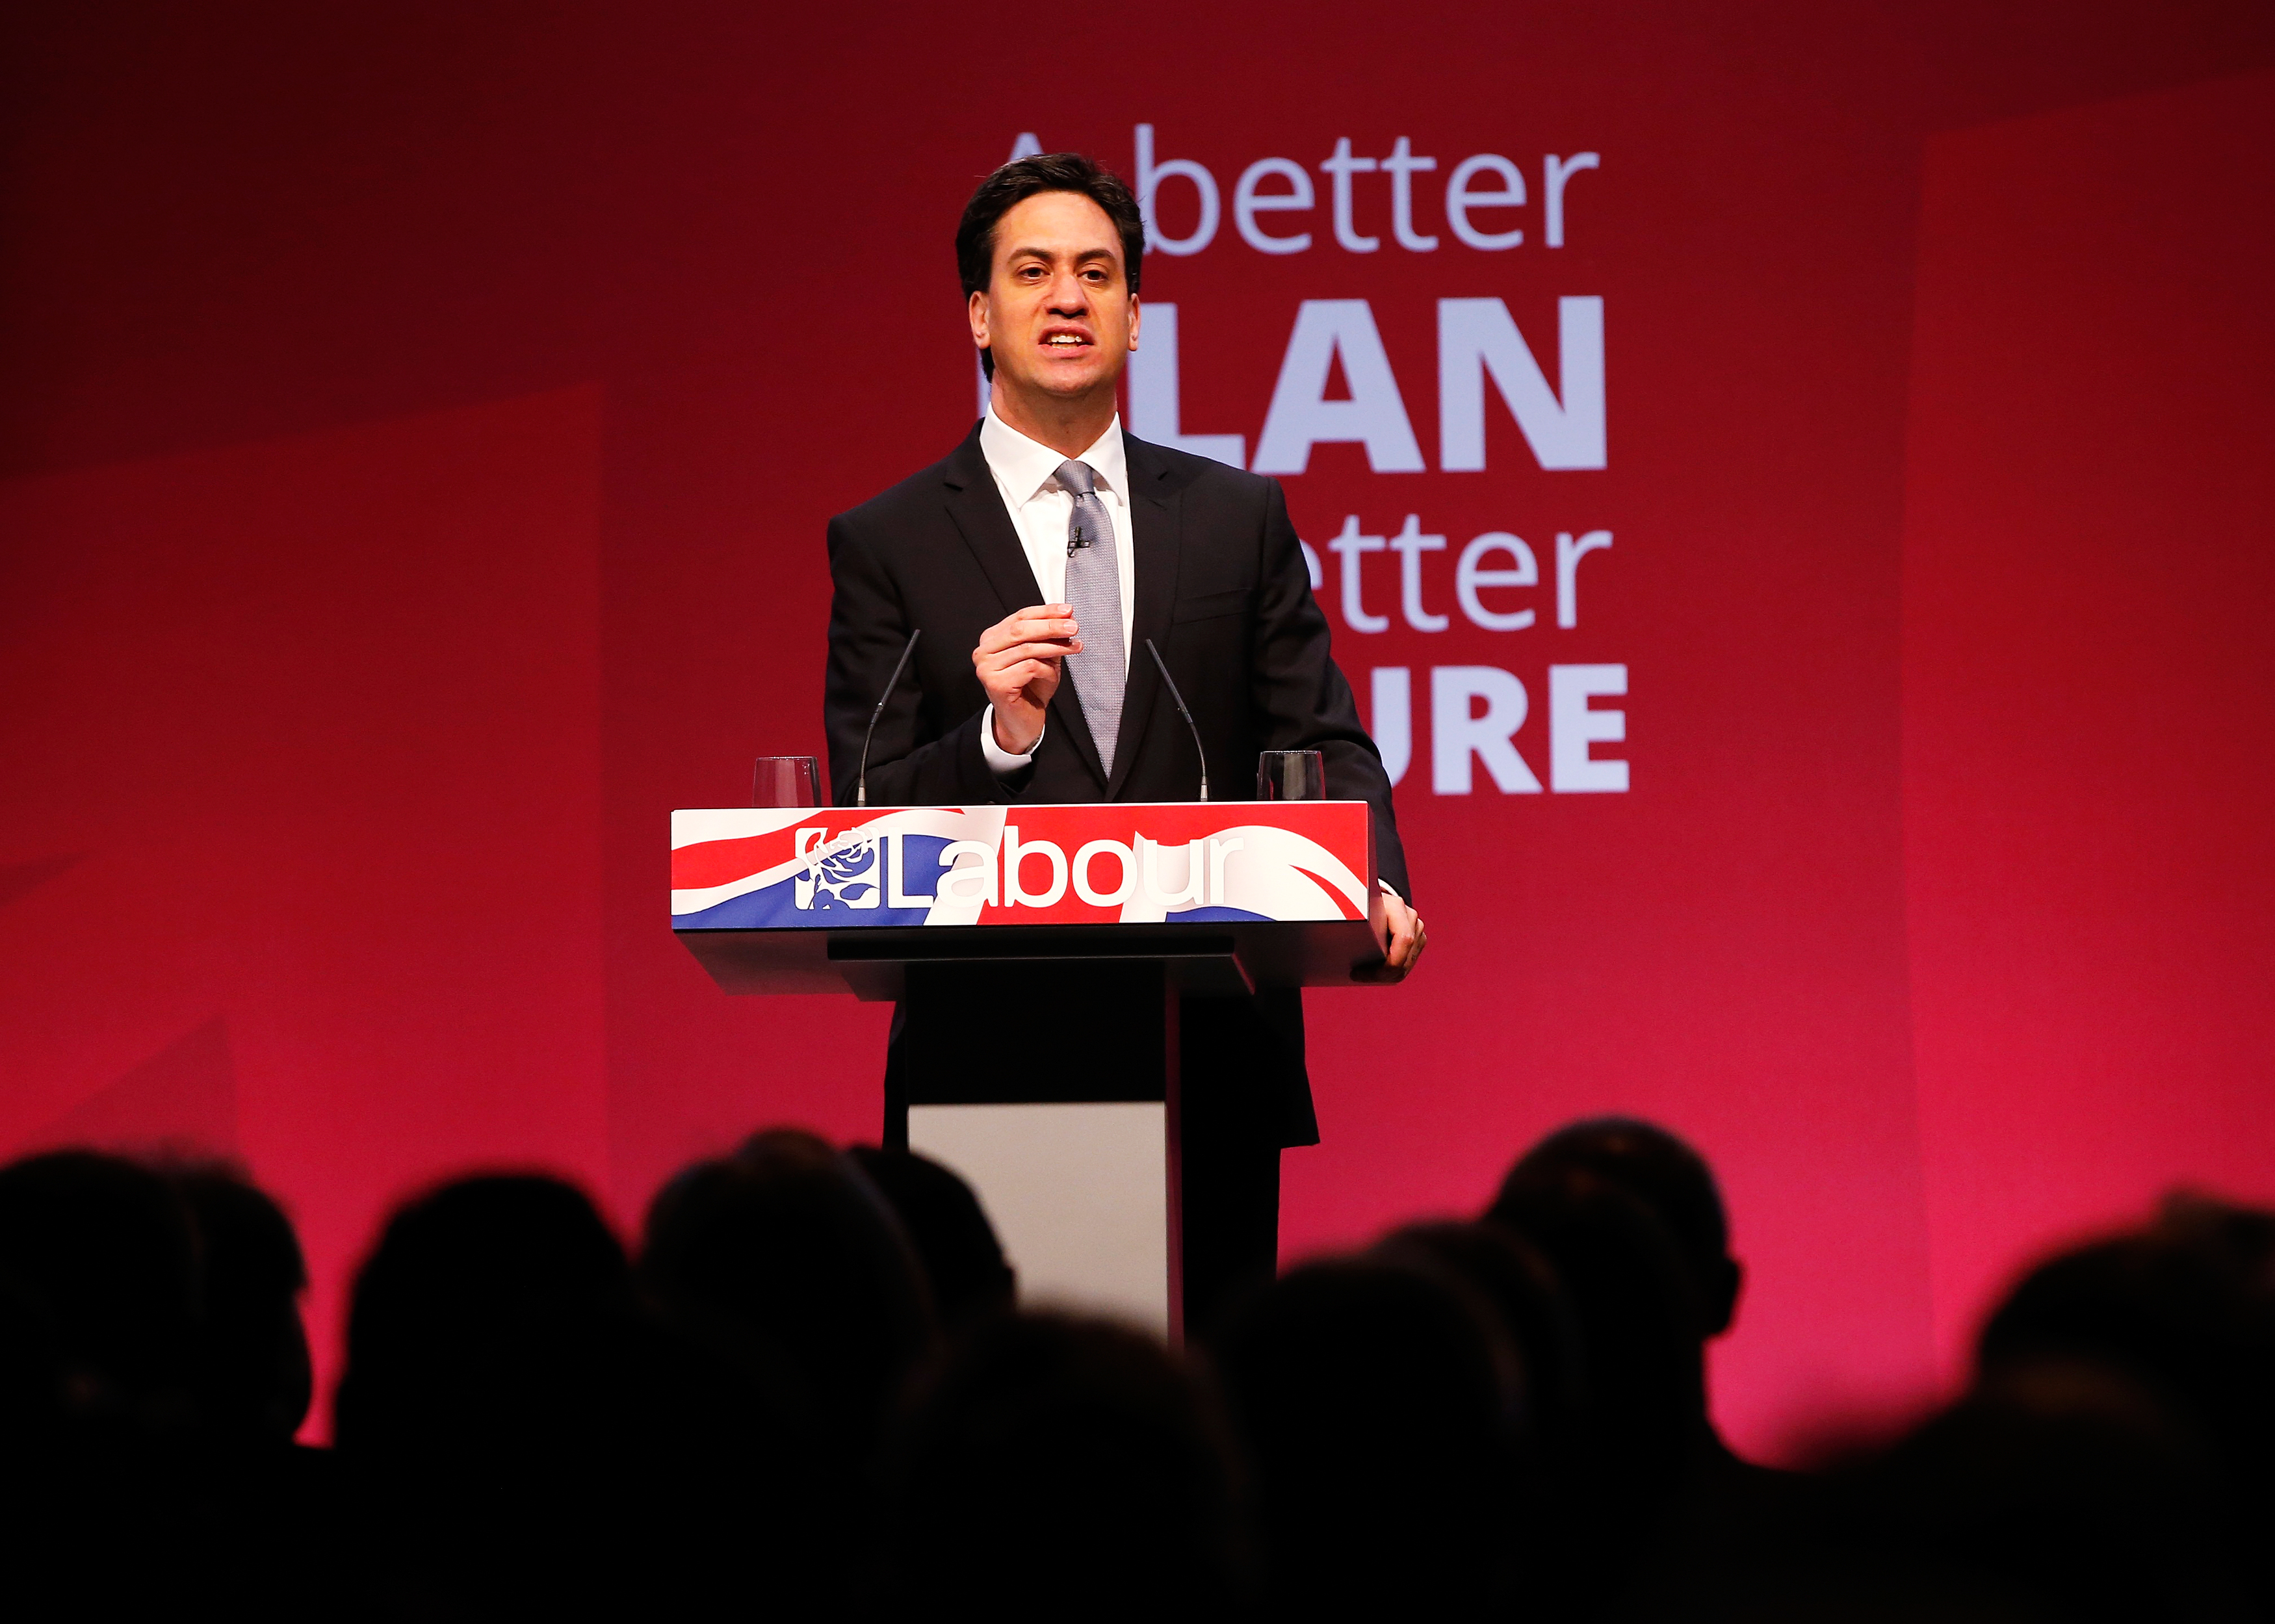 Britain's opposition Labour Party Ed Miliband announces his party's election manifesto at Granada studios in Manchester, northern England